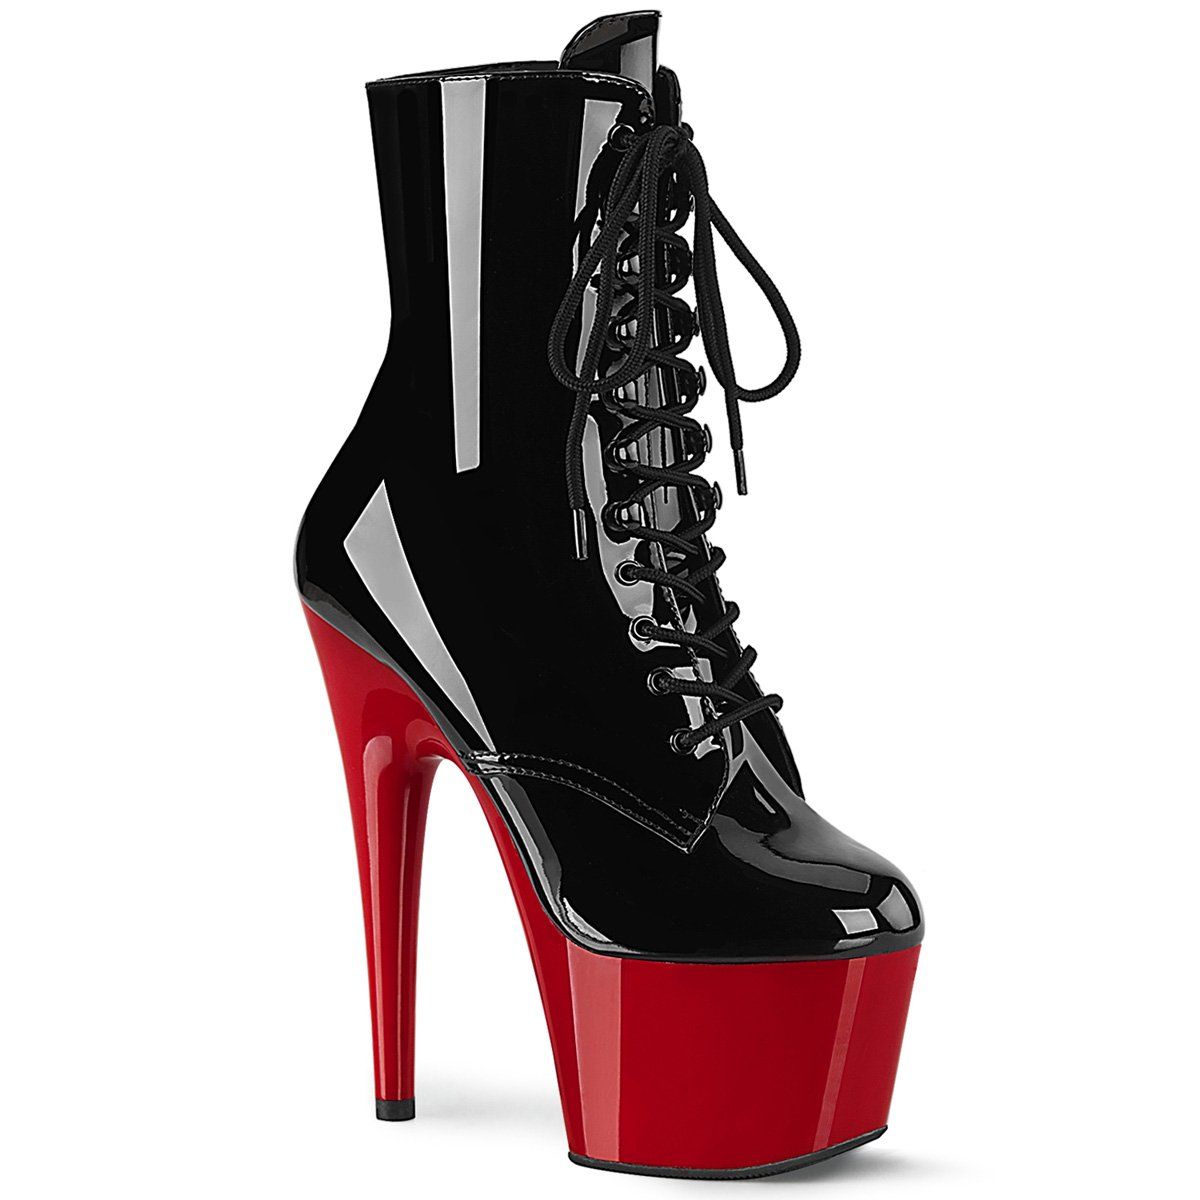 ADORE-1020 Black Patent/Red Ankle Boot Pleaser